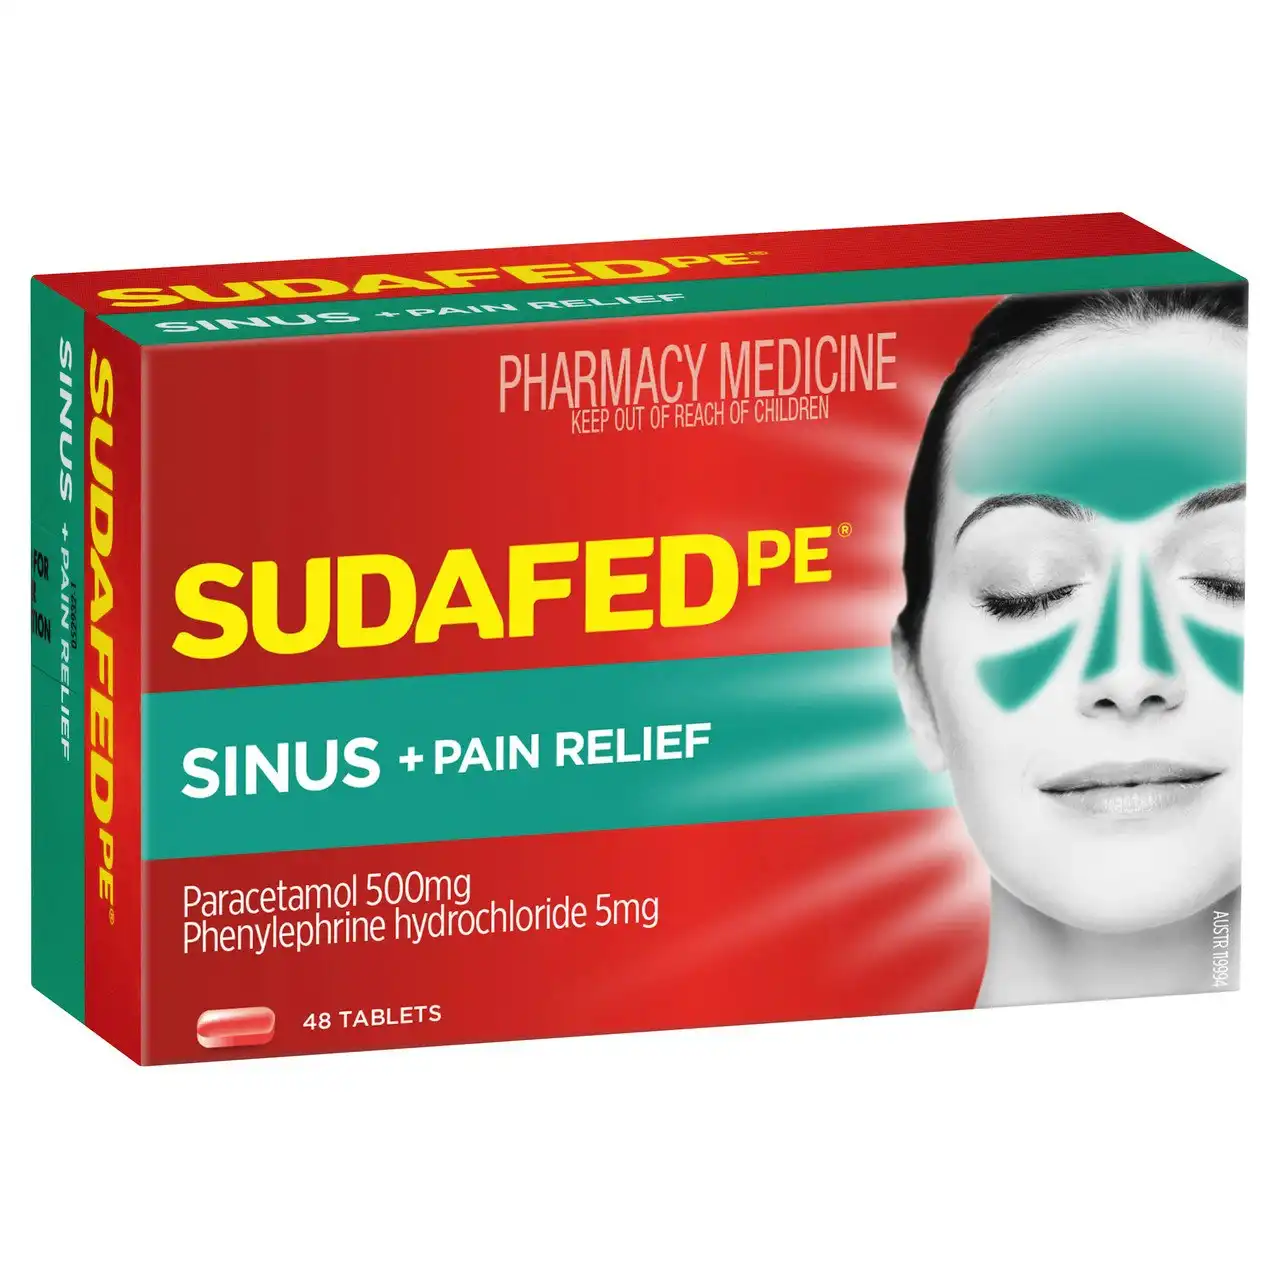 SUDAFED PE Sinus + Pain Relief Tablets 48 Pack